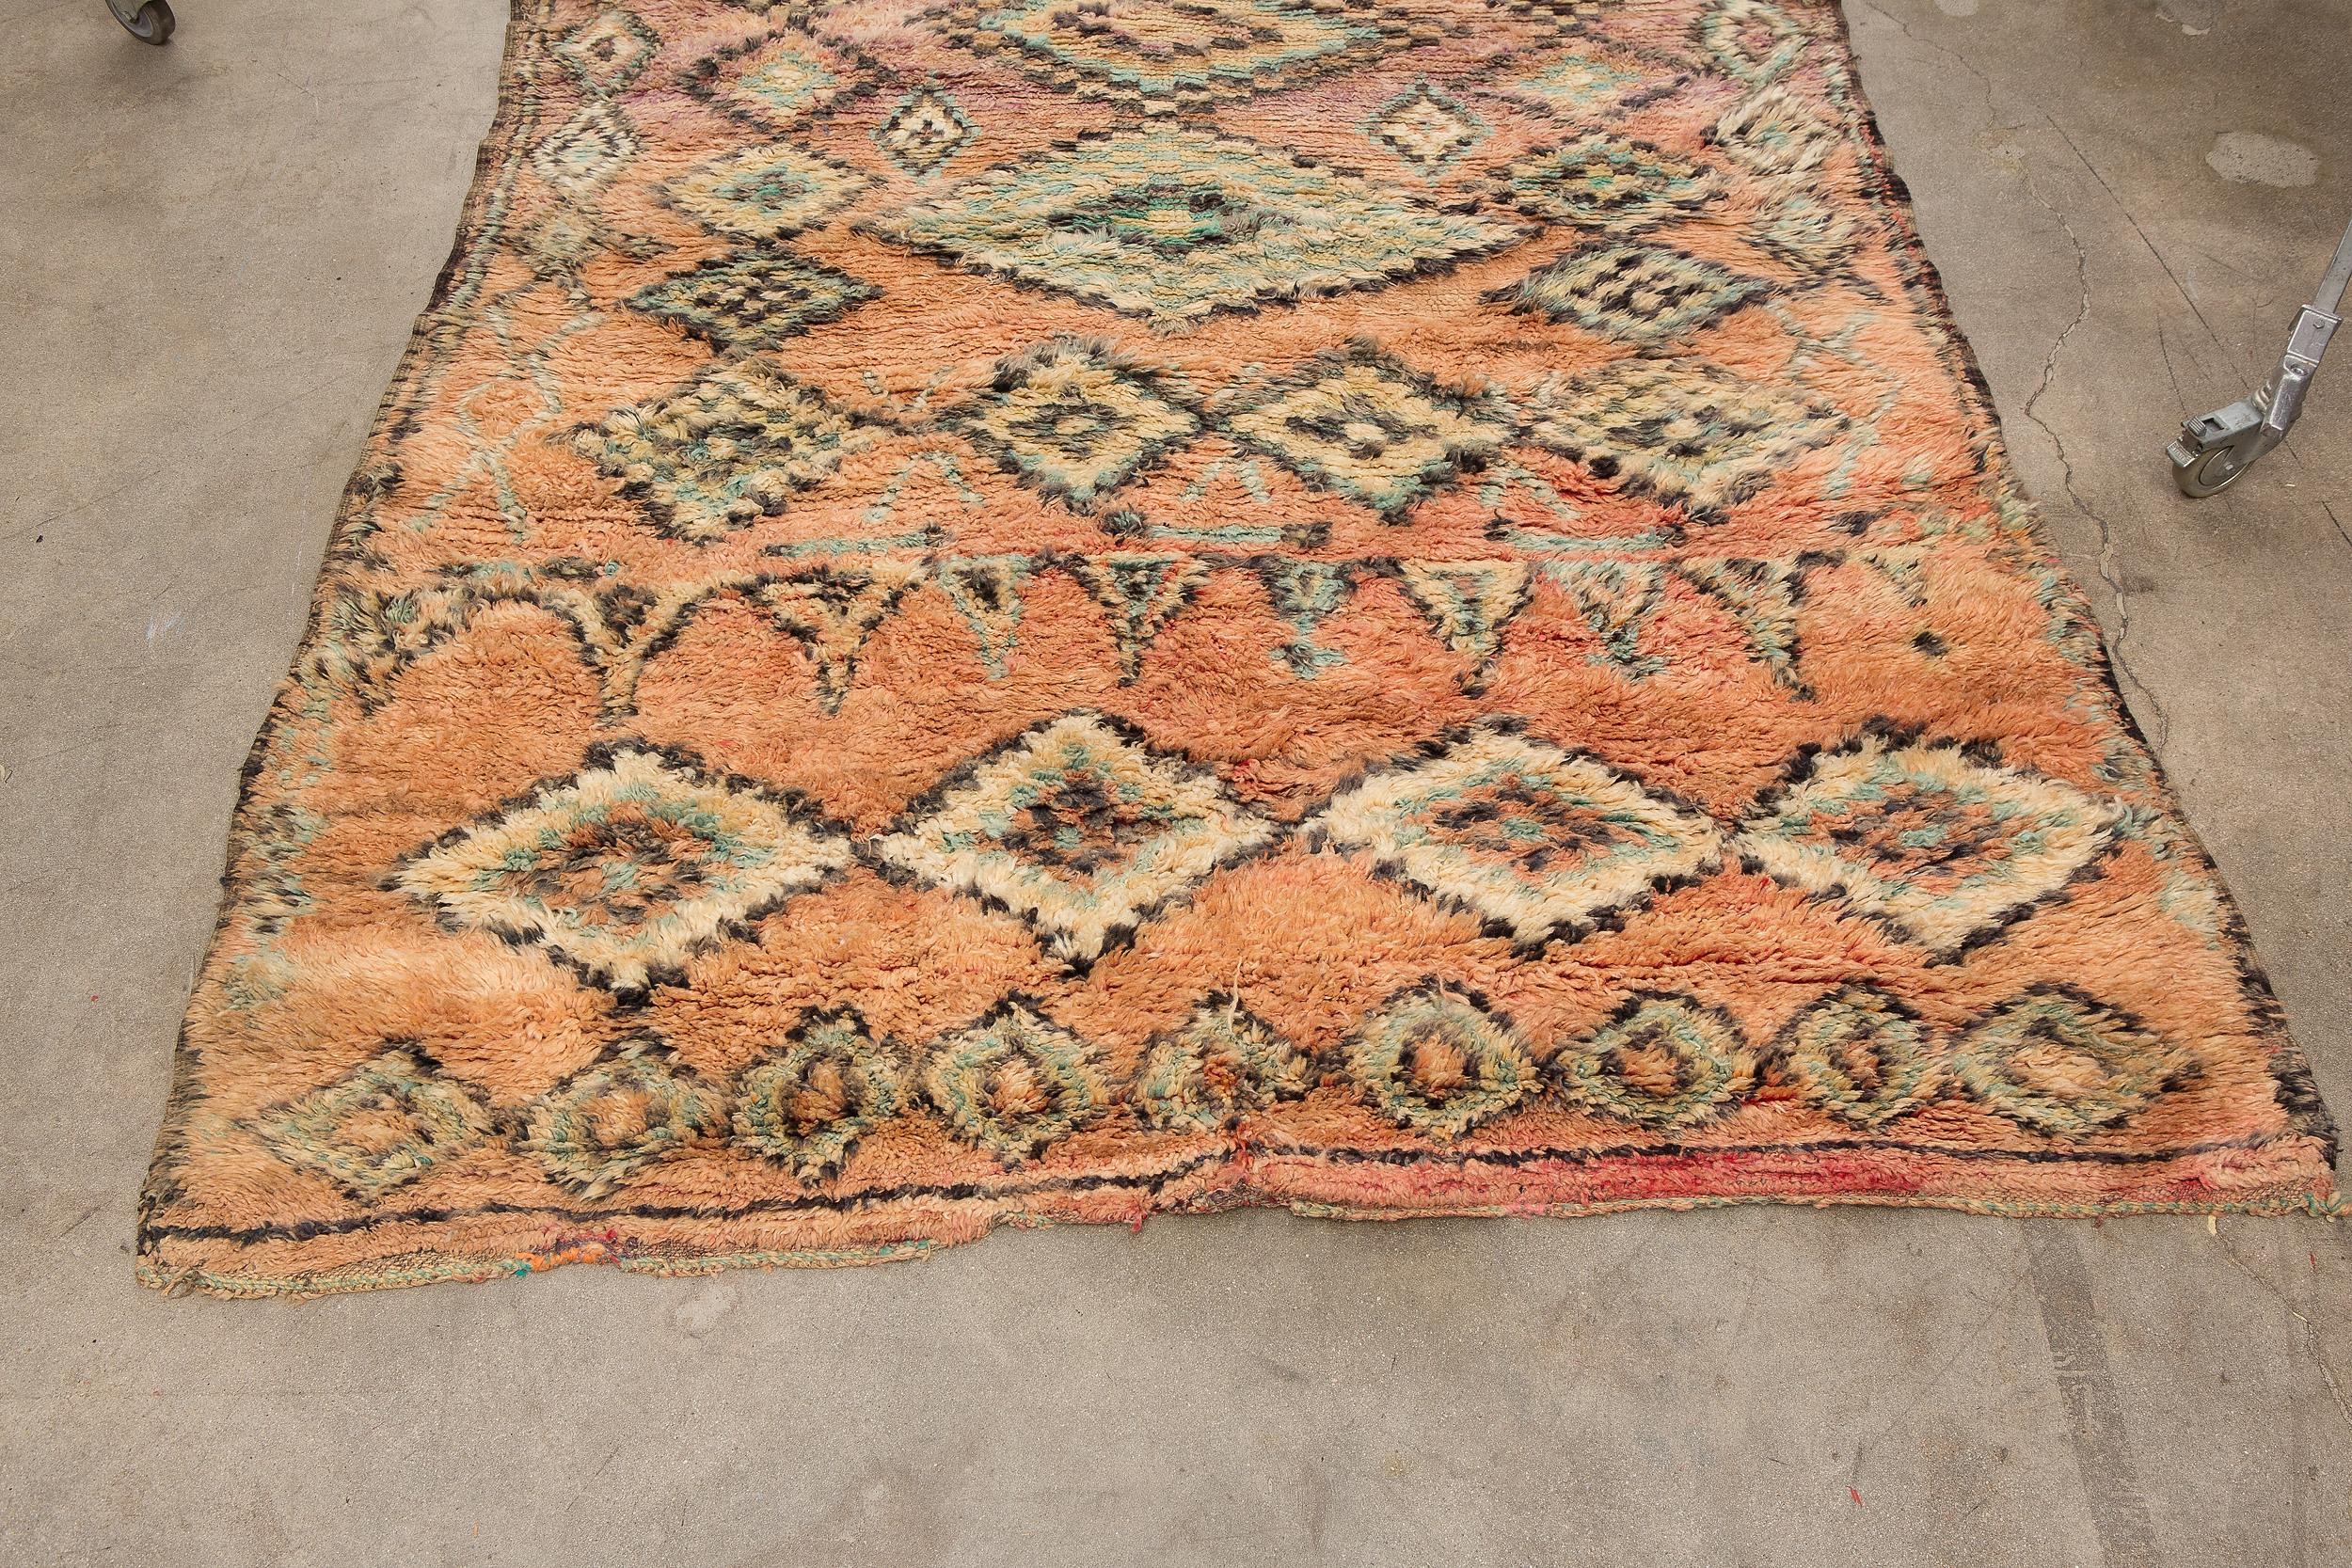 Boujad is a large widespread area and not a tribe. Since they are woven by a number of tribes so they can display varying techniques and styles. Originating in the Middle Atlas region of Morocco, Boujad rugs are low-pile soft wool and known for